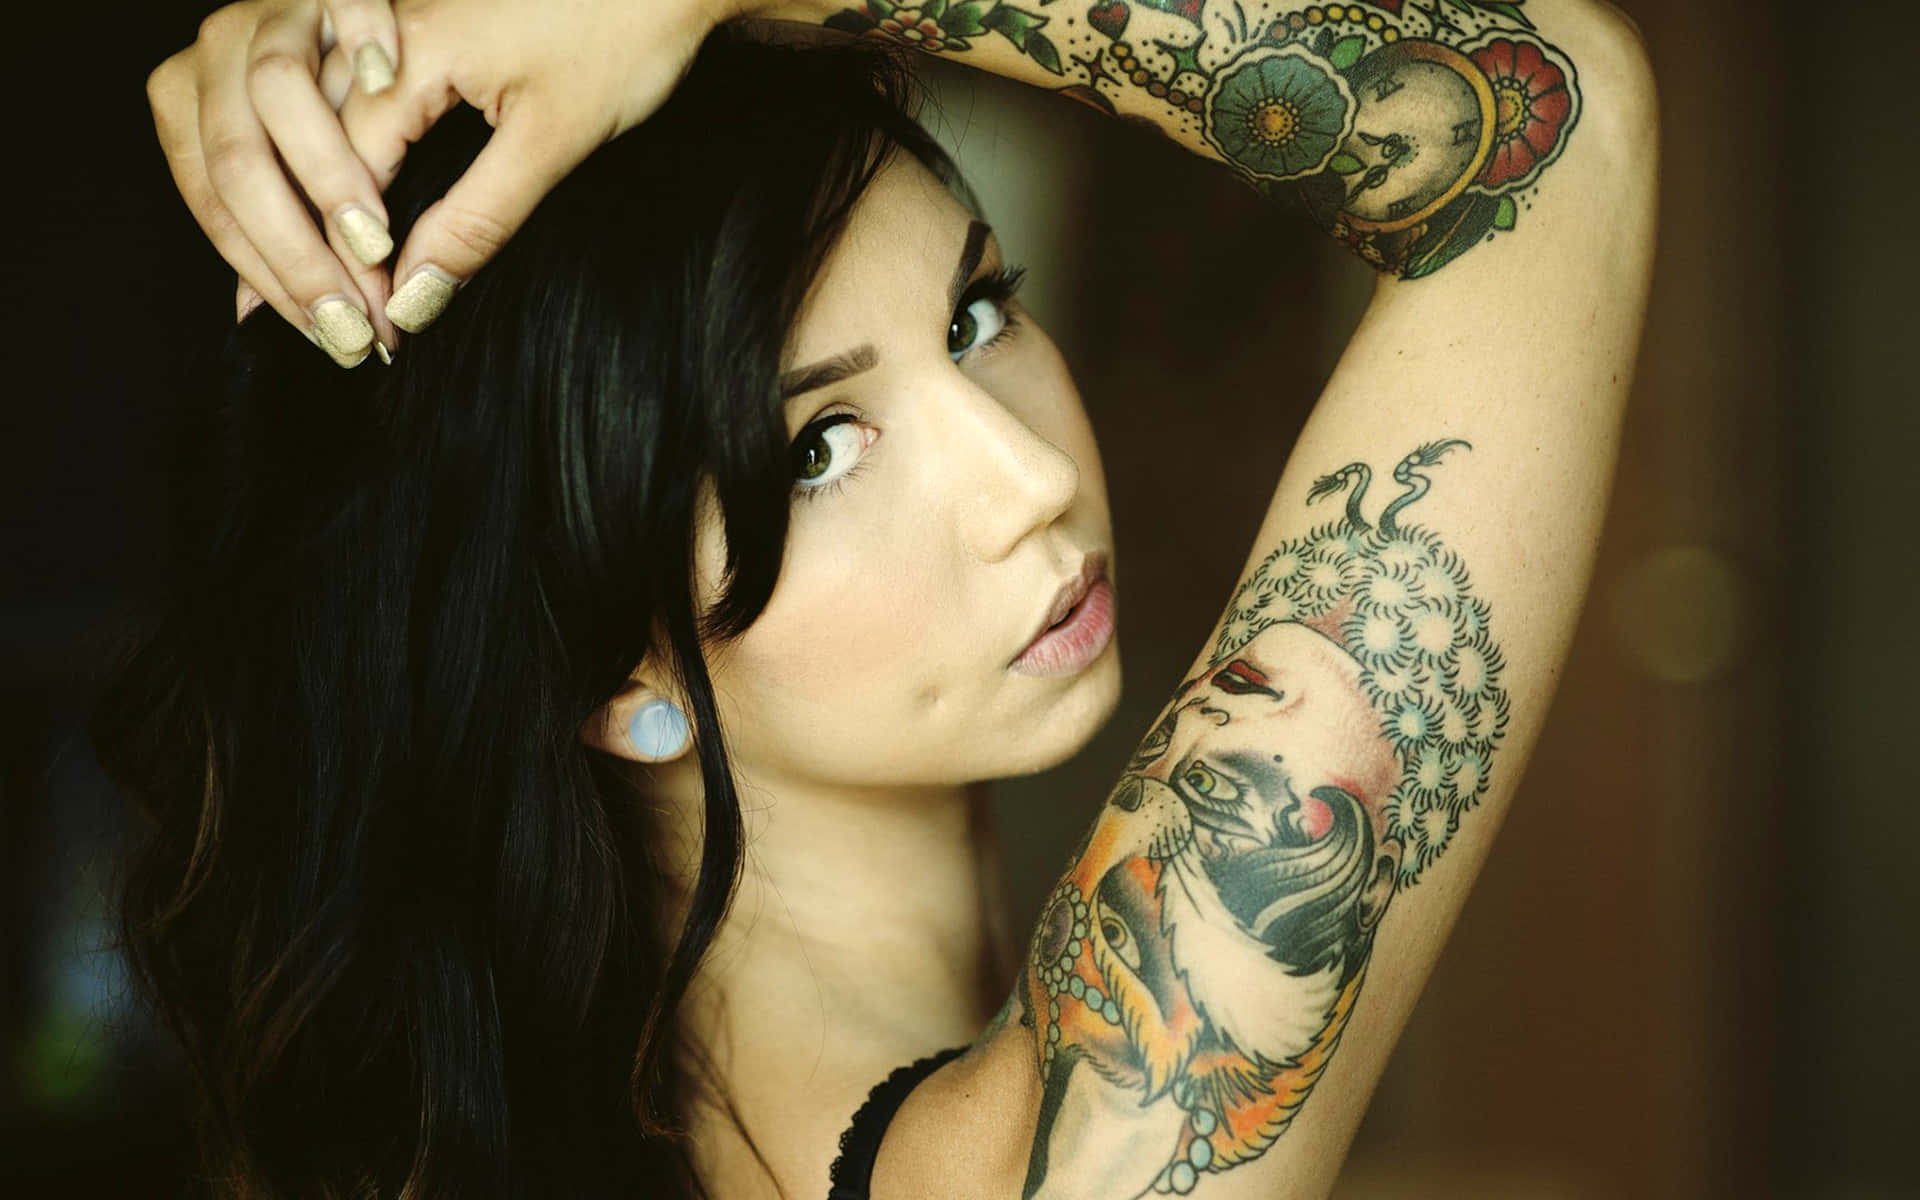 Free Photos - A Beautiful Young Woman With Tattoos On Her Arm, Standing In  A Dark Room. The Lighting In The Room Shines On Her, Emphasizing Her  Presence. She Has Long Hair